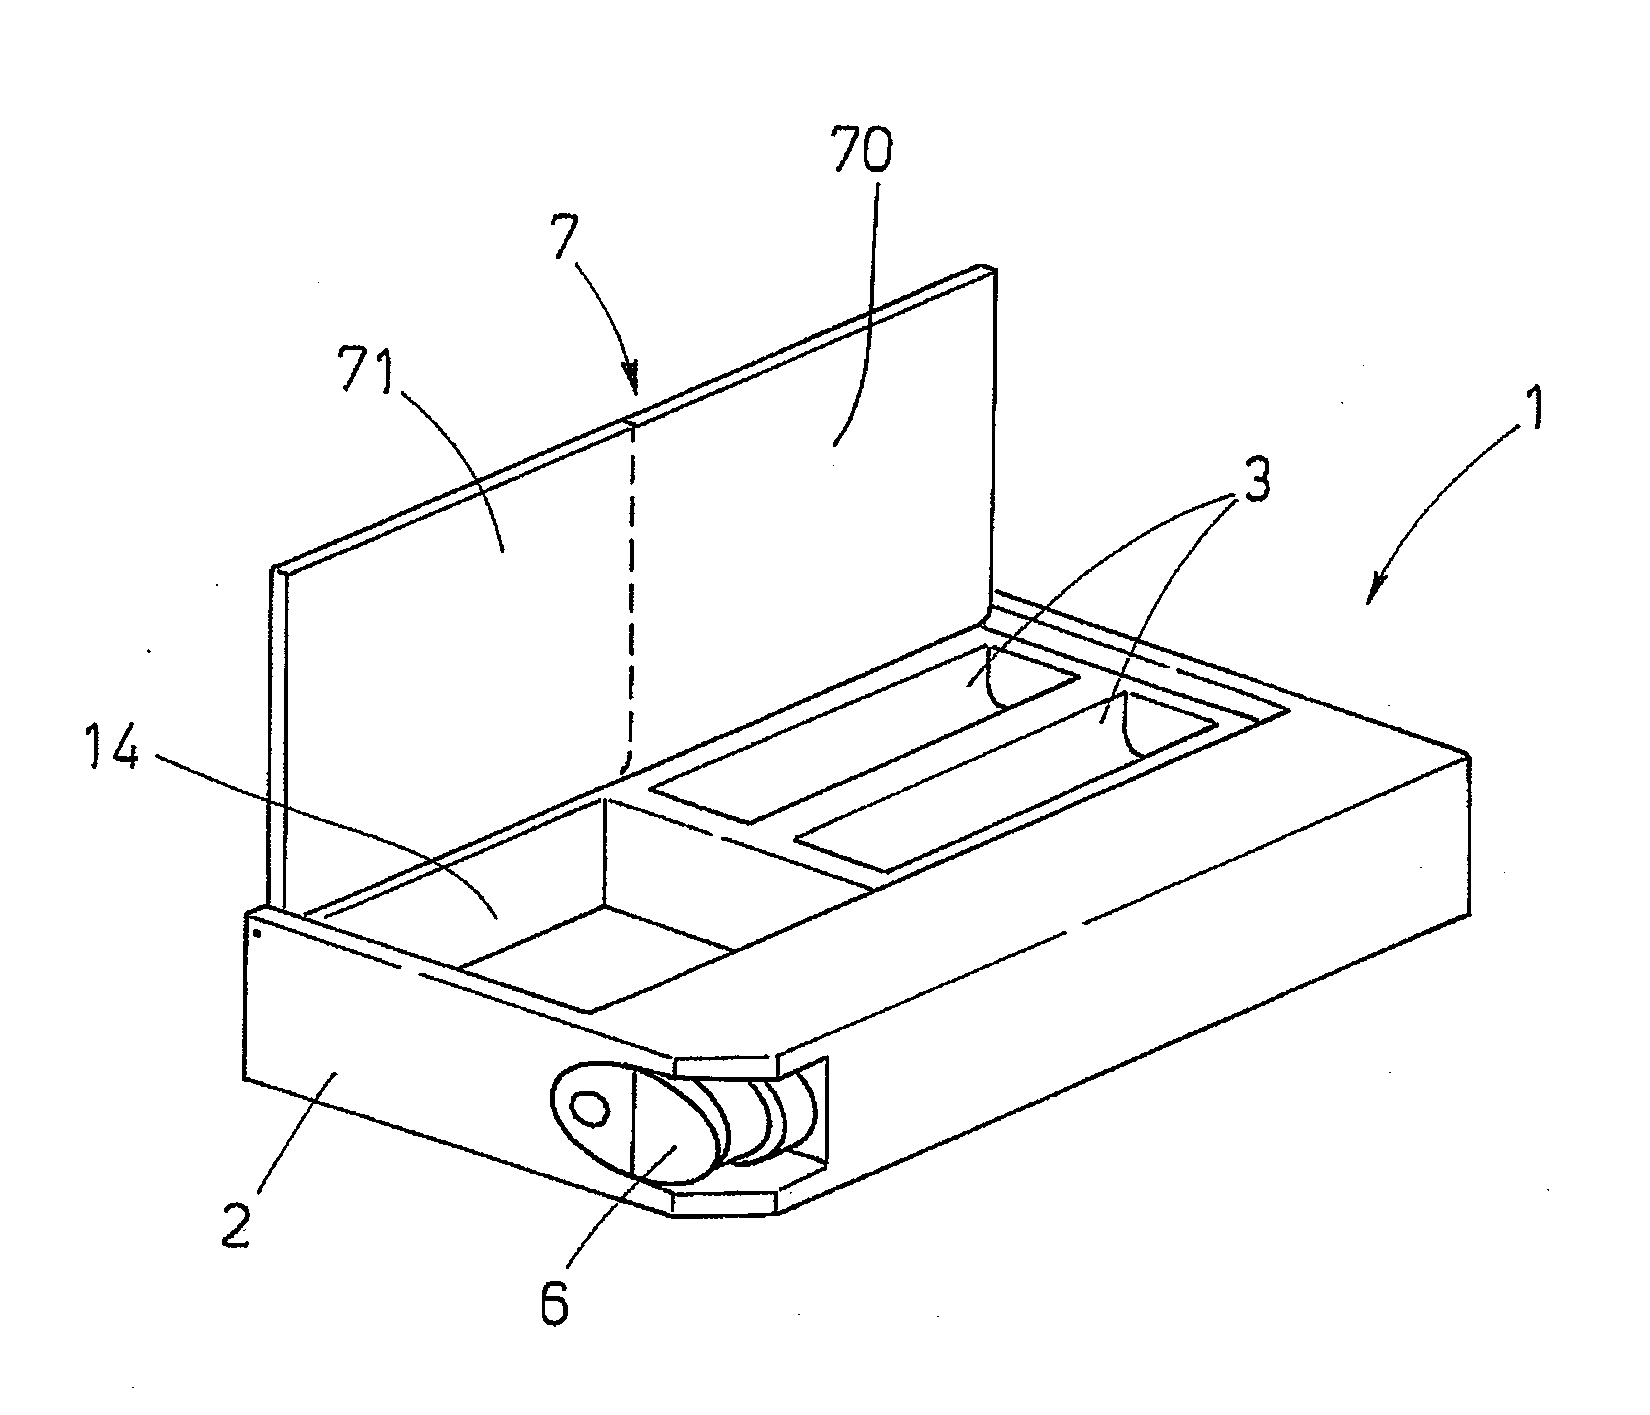 Portable Ecological Article for Extinguishing a Cigarette and for Containing Residues of the Cigarette